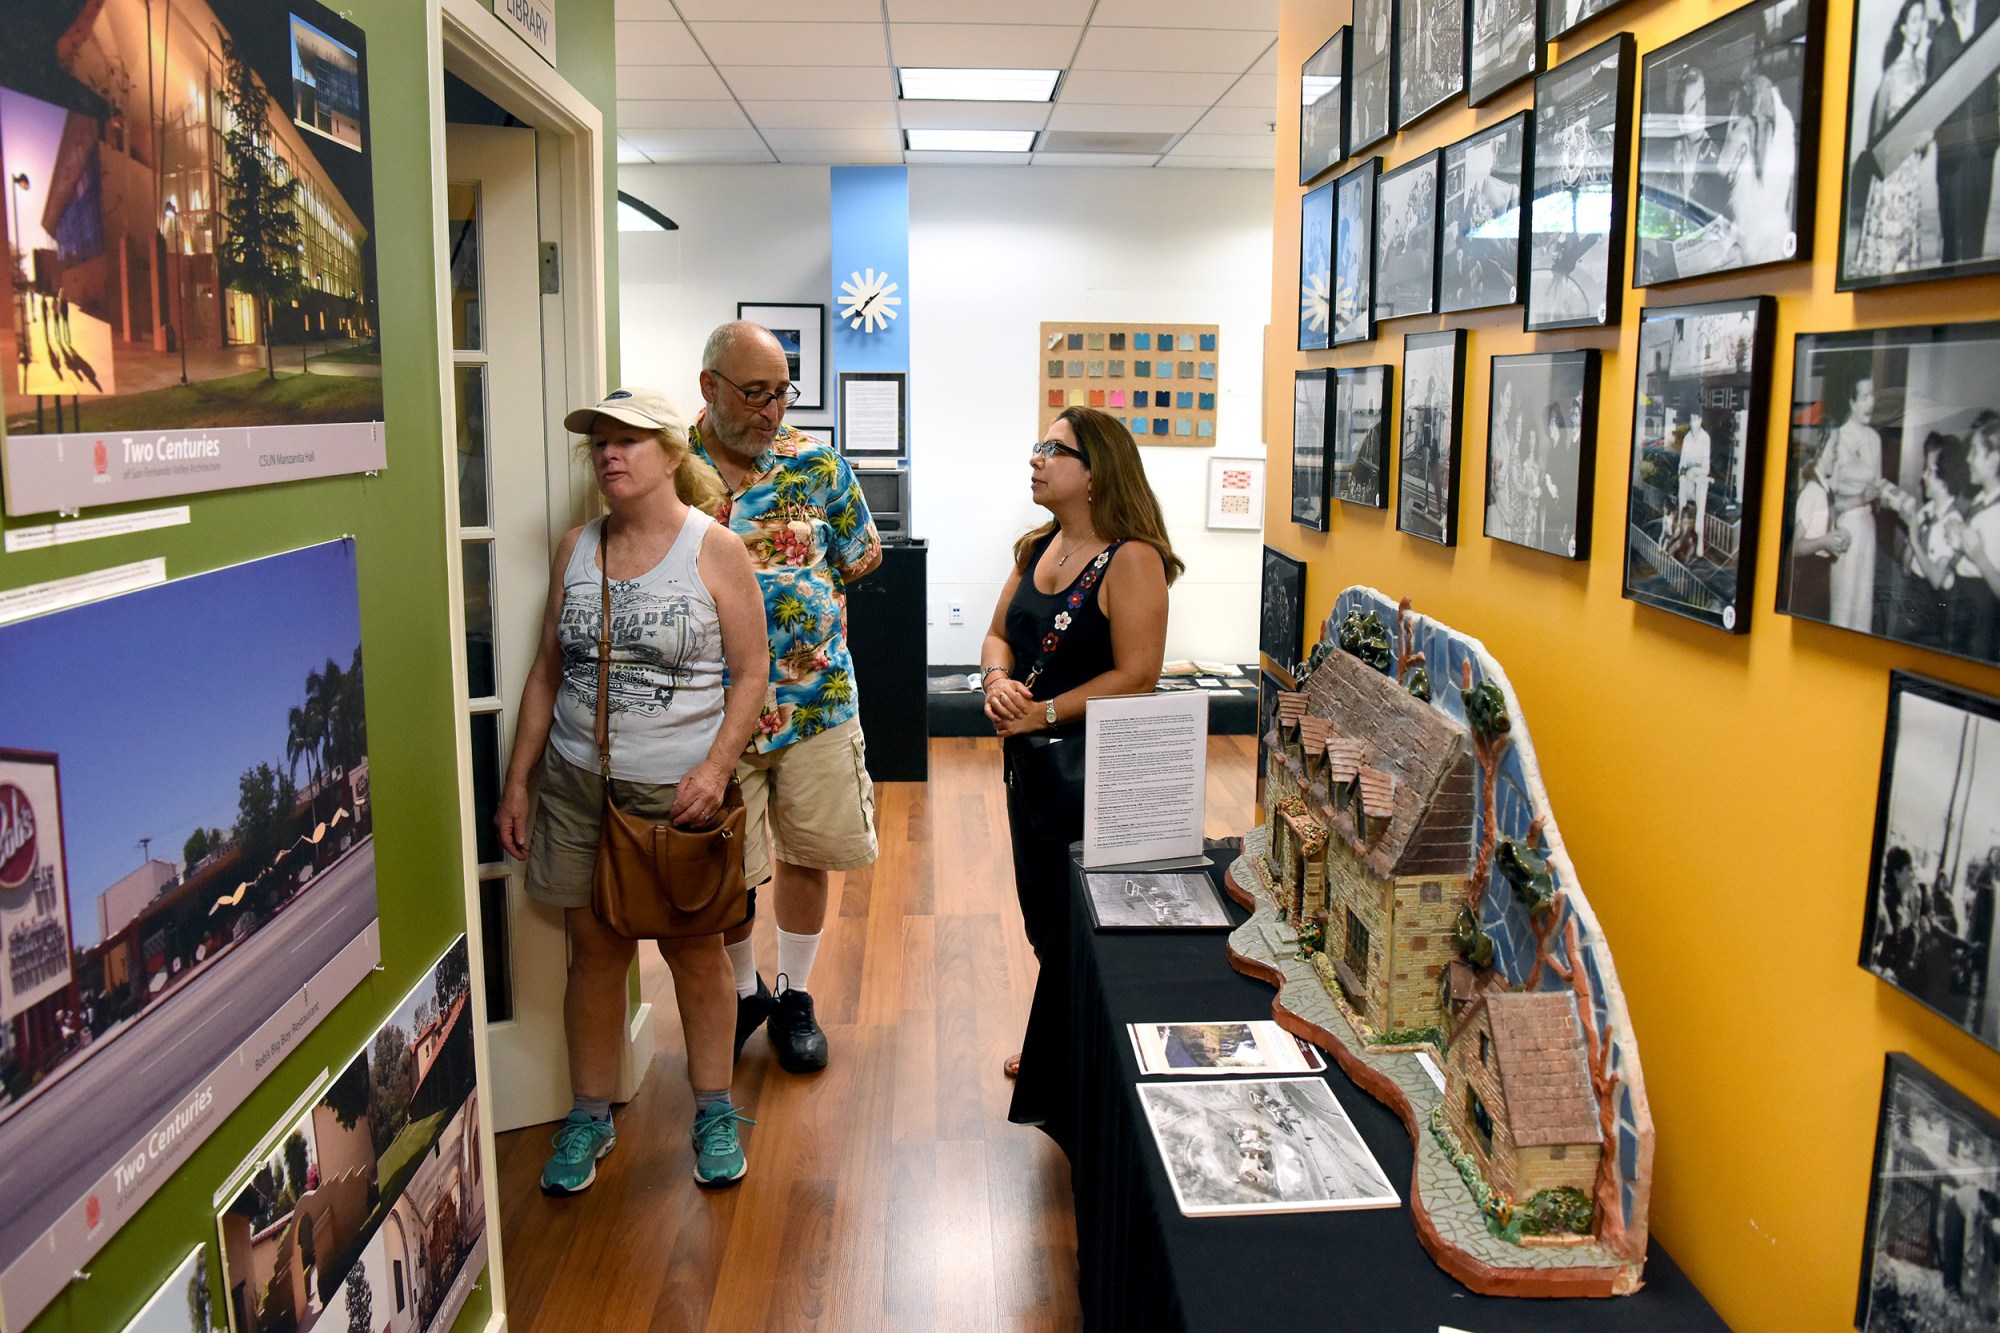 People look at displays in the Museum of the San Fernando Valley. (Photo by Michael Owen Baker)